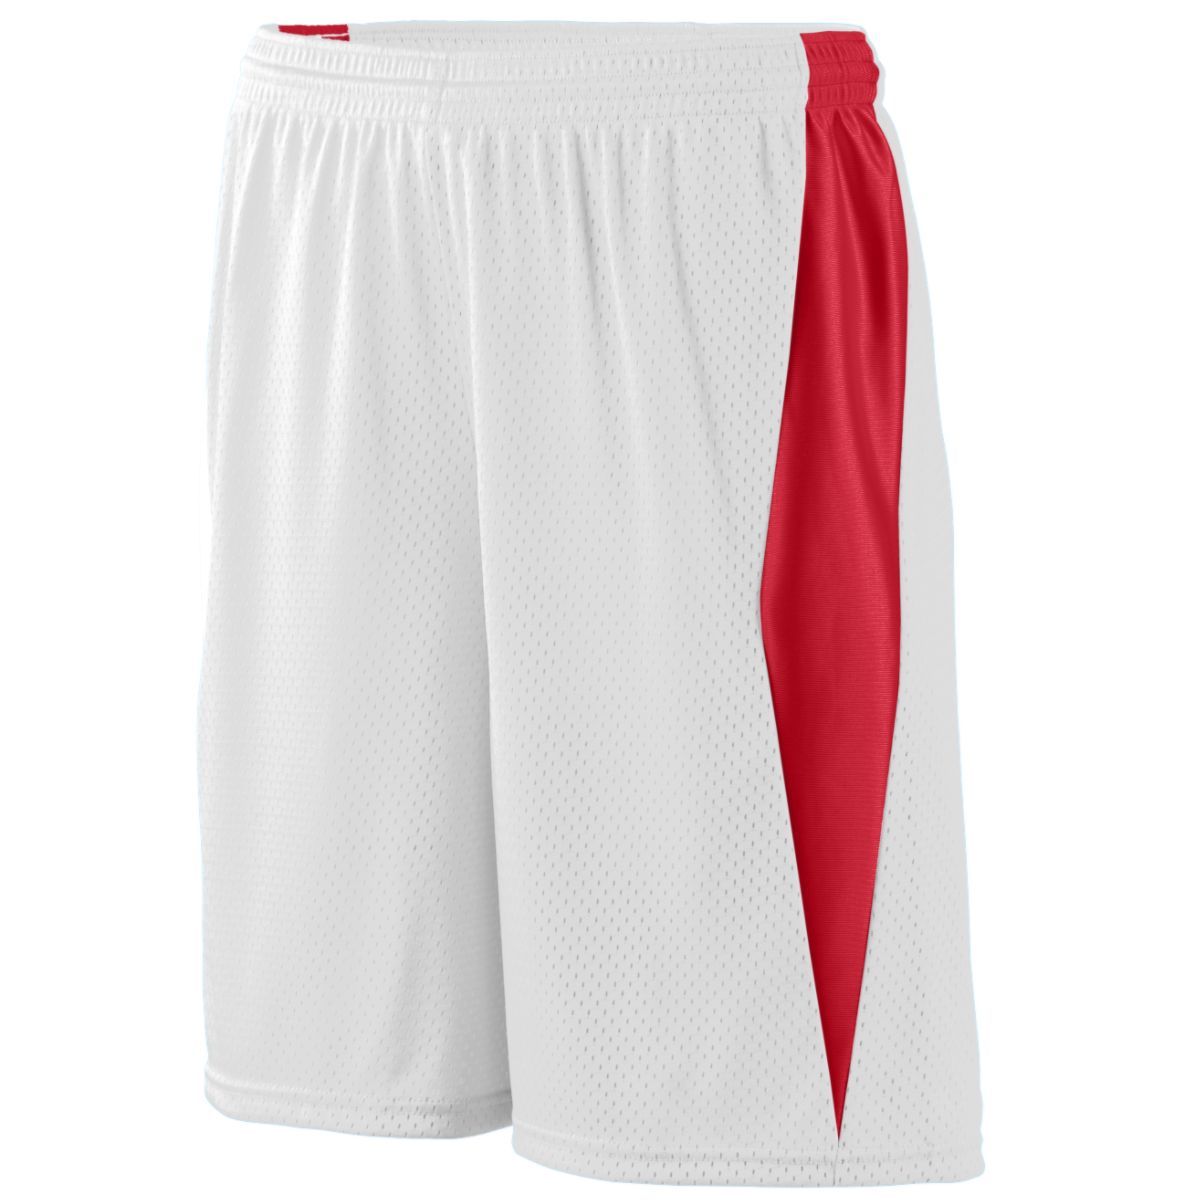 Augusta Sportswear Top Score Shorts in White/Red  -Part of the Adult, Adult-Shorts, Augusta-Products, Lacrosse, All-Sports, All-Sports-1 product lines at KanaleyCreations.com